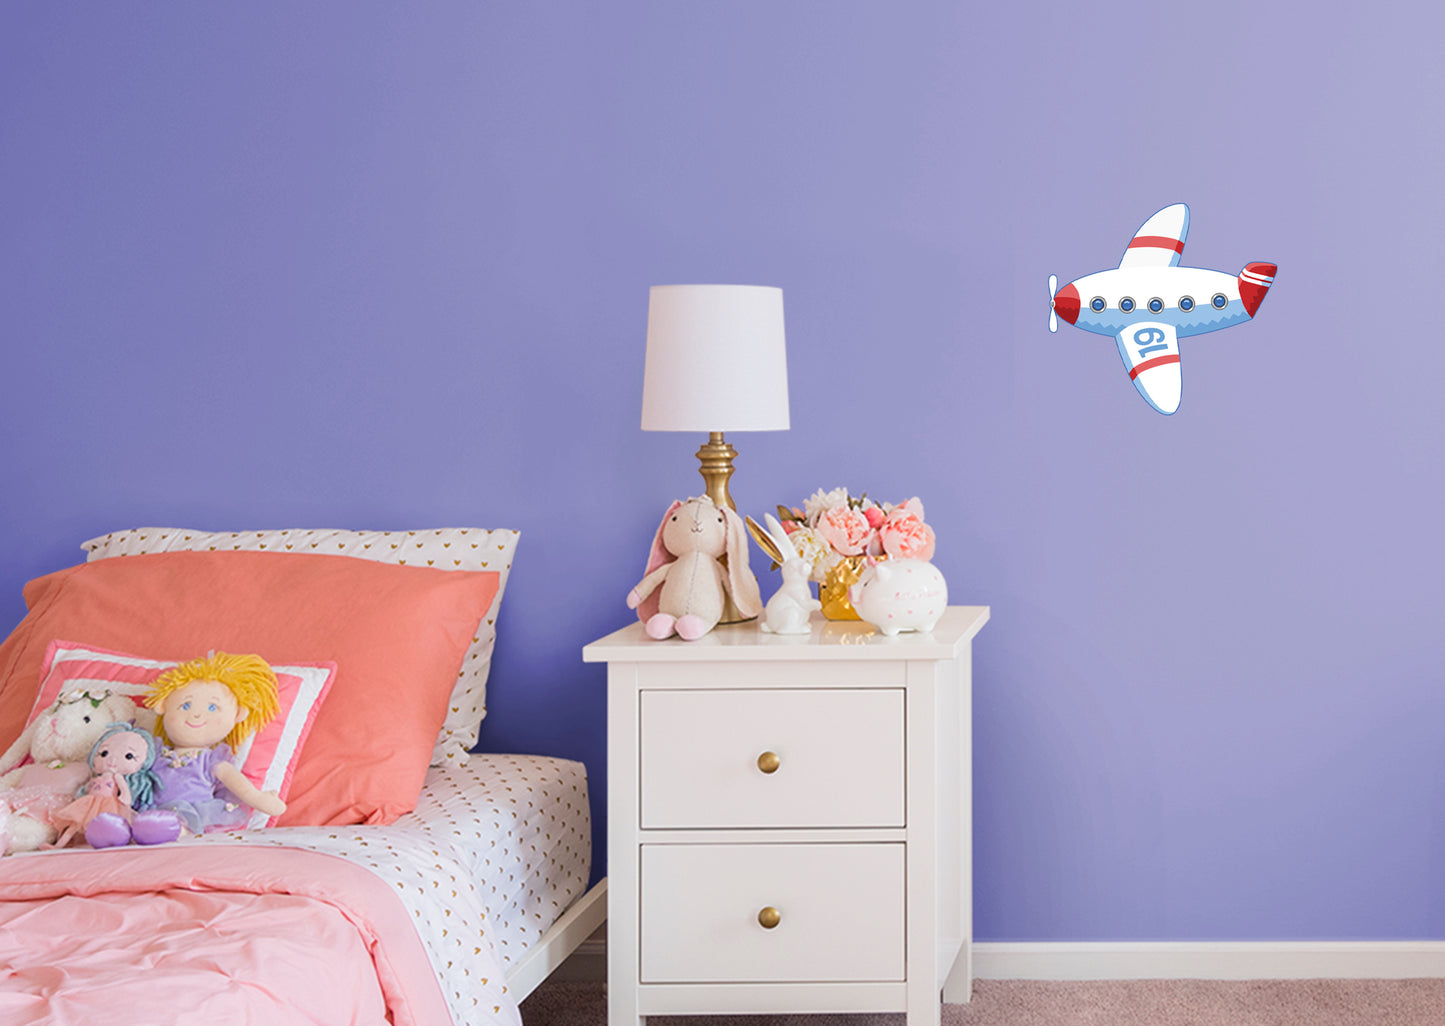 Nursery: Planes White Plane Icon        -   Removable     Adhesive Decal